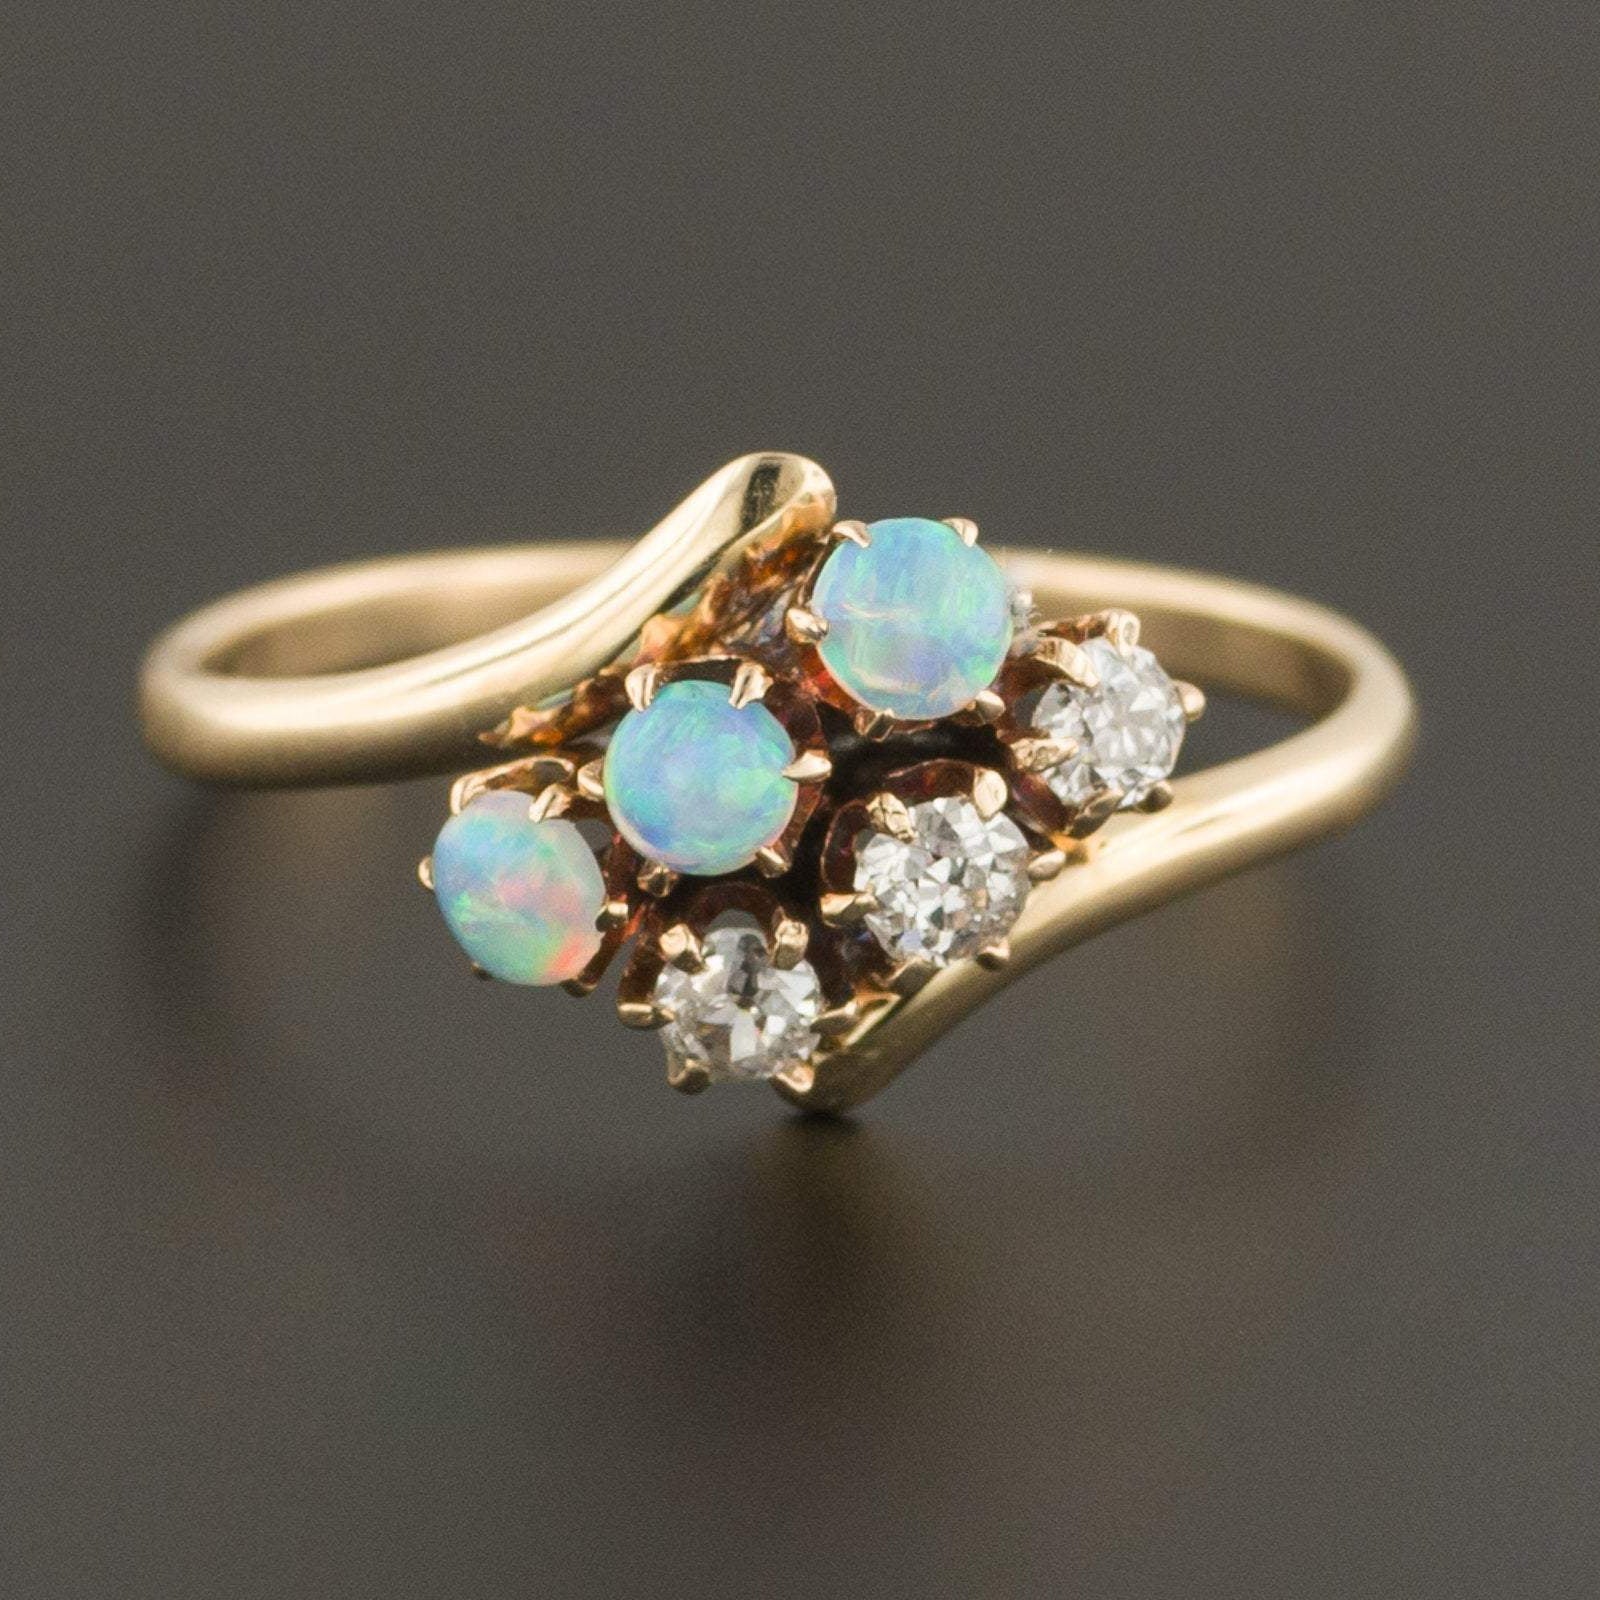 Opal & Diamond Ring | 14k Gold Ring | Antique Opal Ring | Antique Ring | October Birthstone Ring